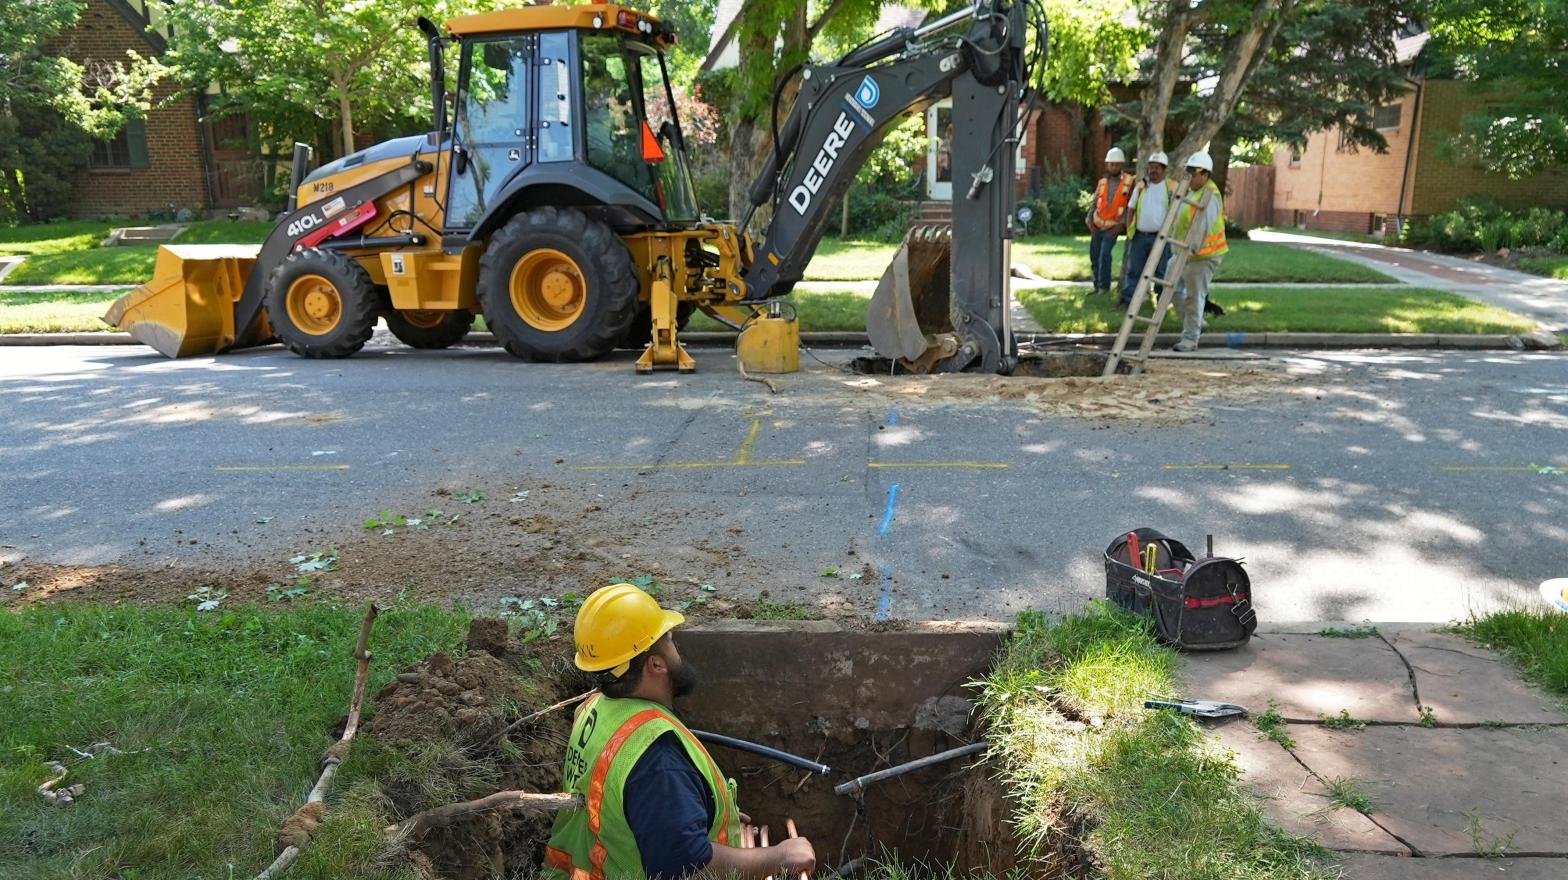 A Denver Water crew works to replace a lead water service line installed in 1927 with a new copper one at a private home on June 17, 2021, in Denver. (Photo: Brittany Peterson, AP)